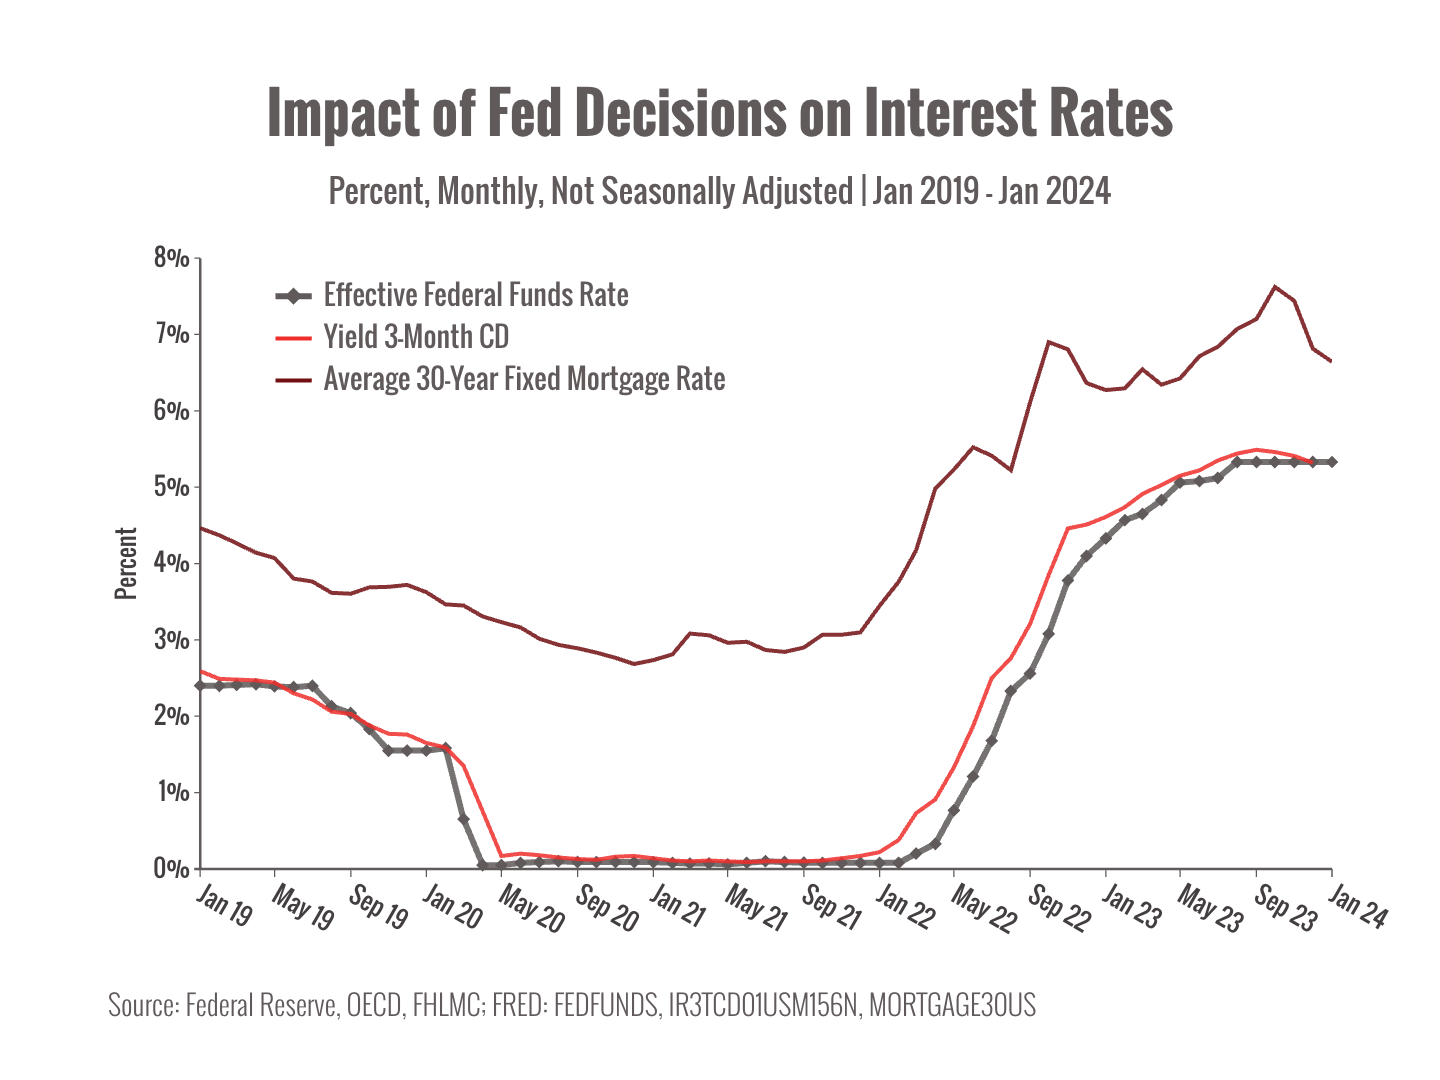 Line graph titled "Impact of Fed Decisions on Interest Rates", dated from January 2019 to January 2024.